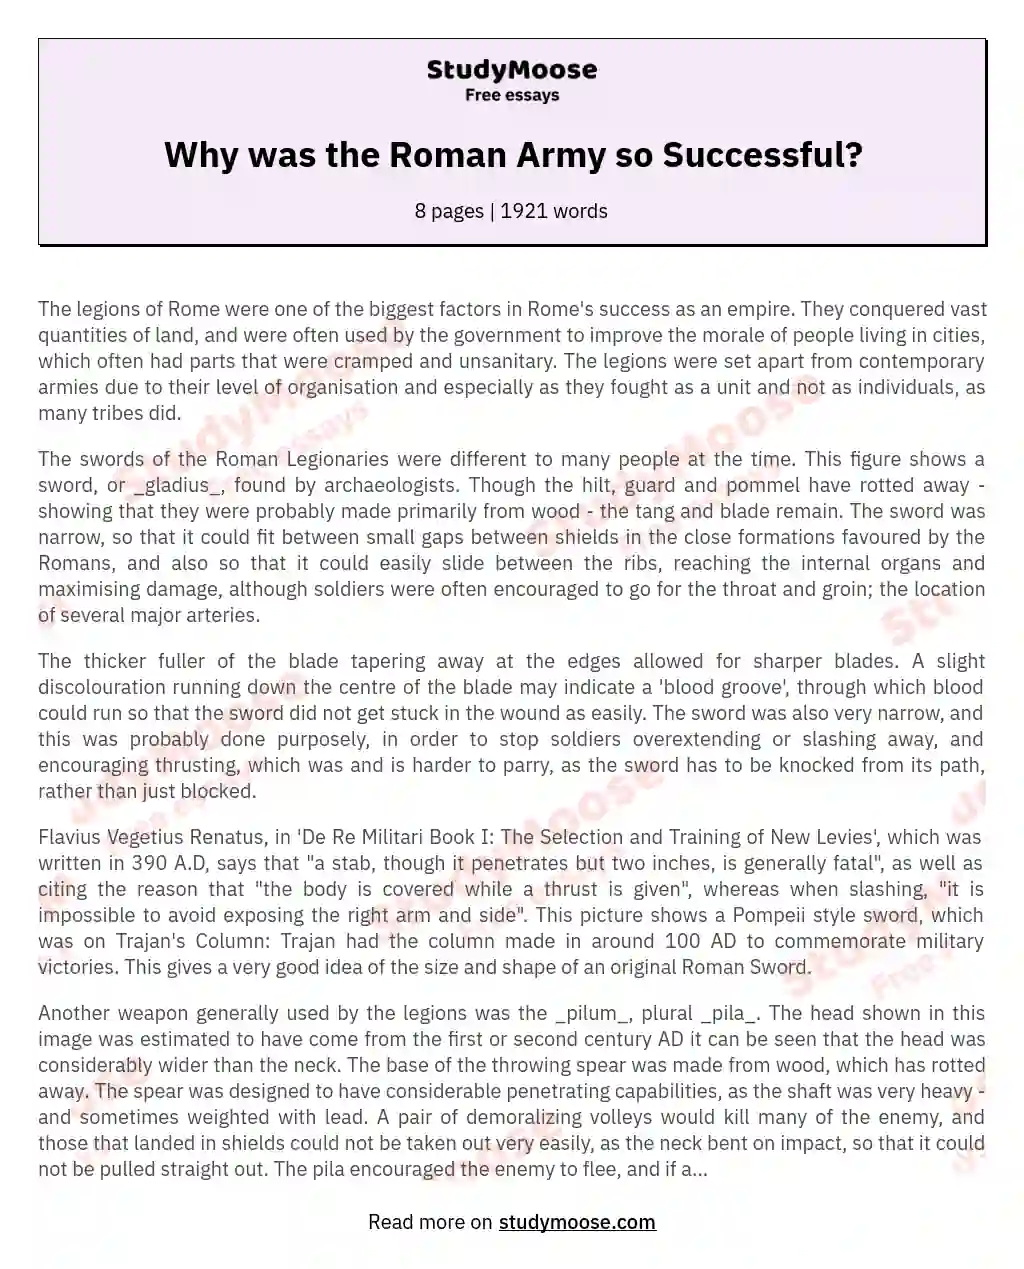 Why was the Roman Army so Successful?